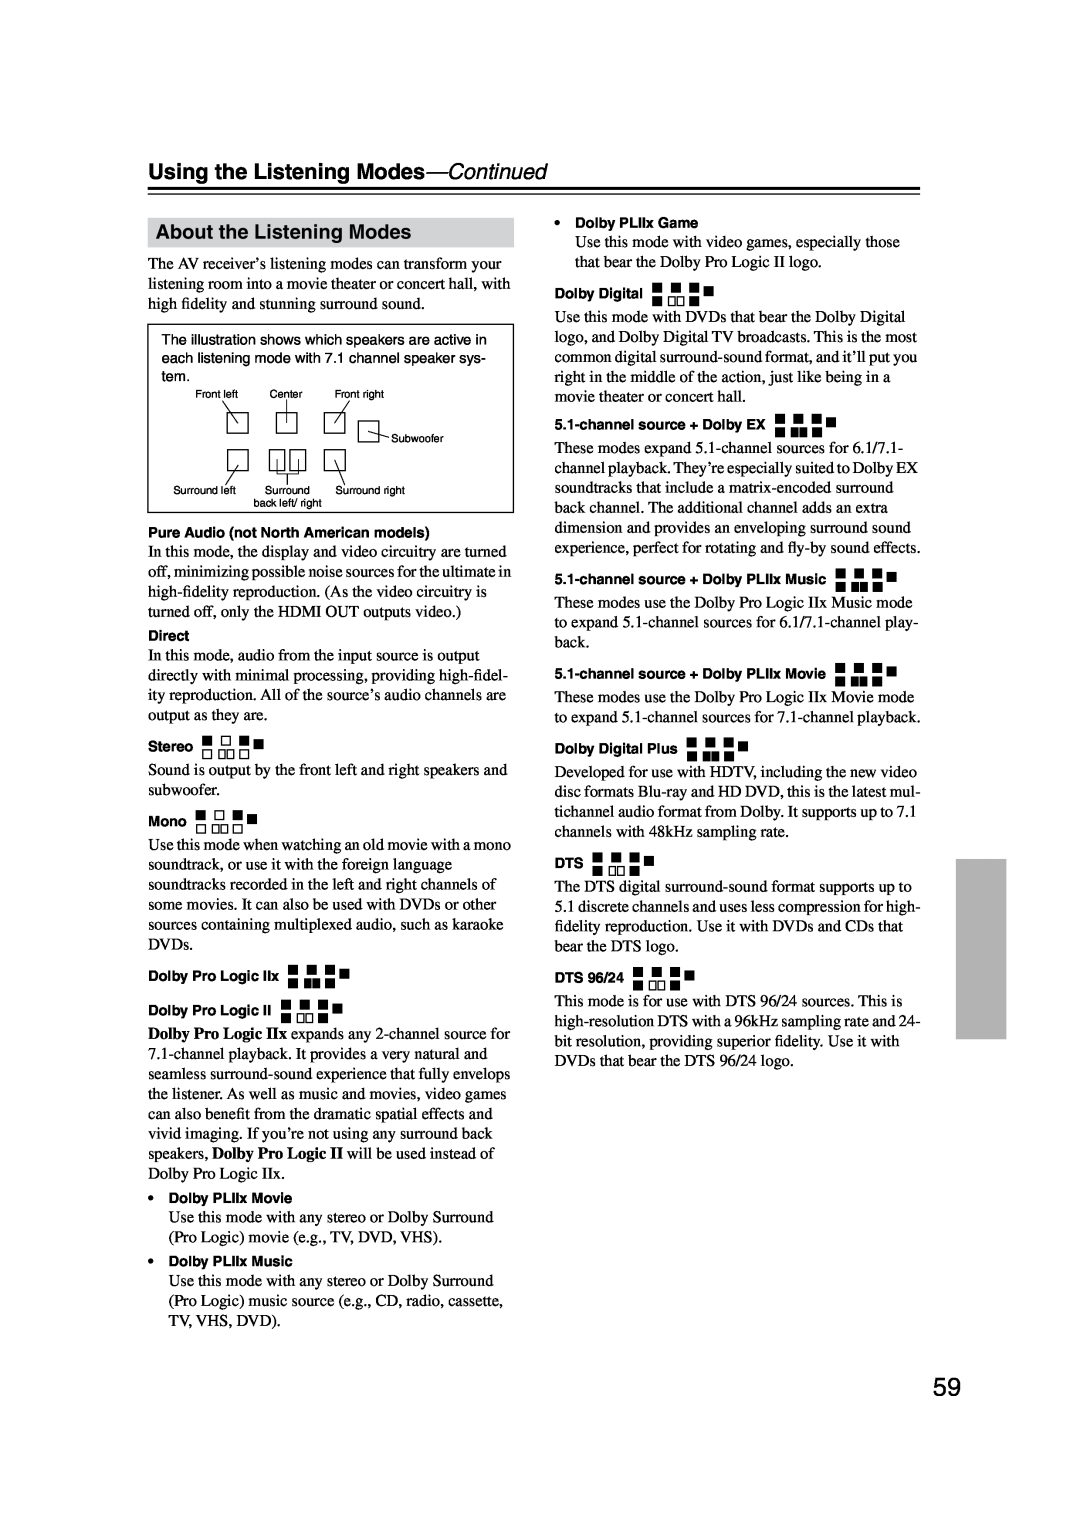 Onkyo TX-SR576, TX-SR506 instruction manual About the Listening Modes, Using the Listening Modes—Continued 